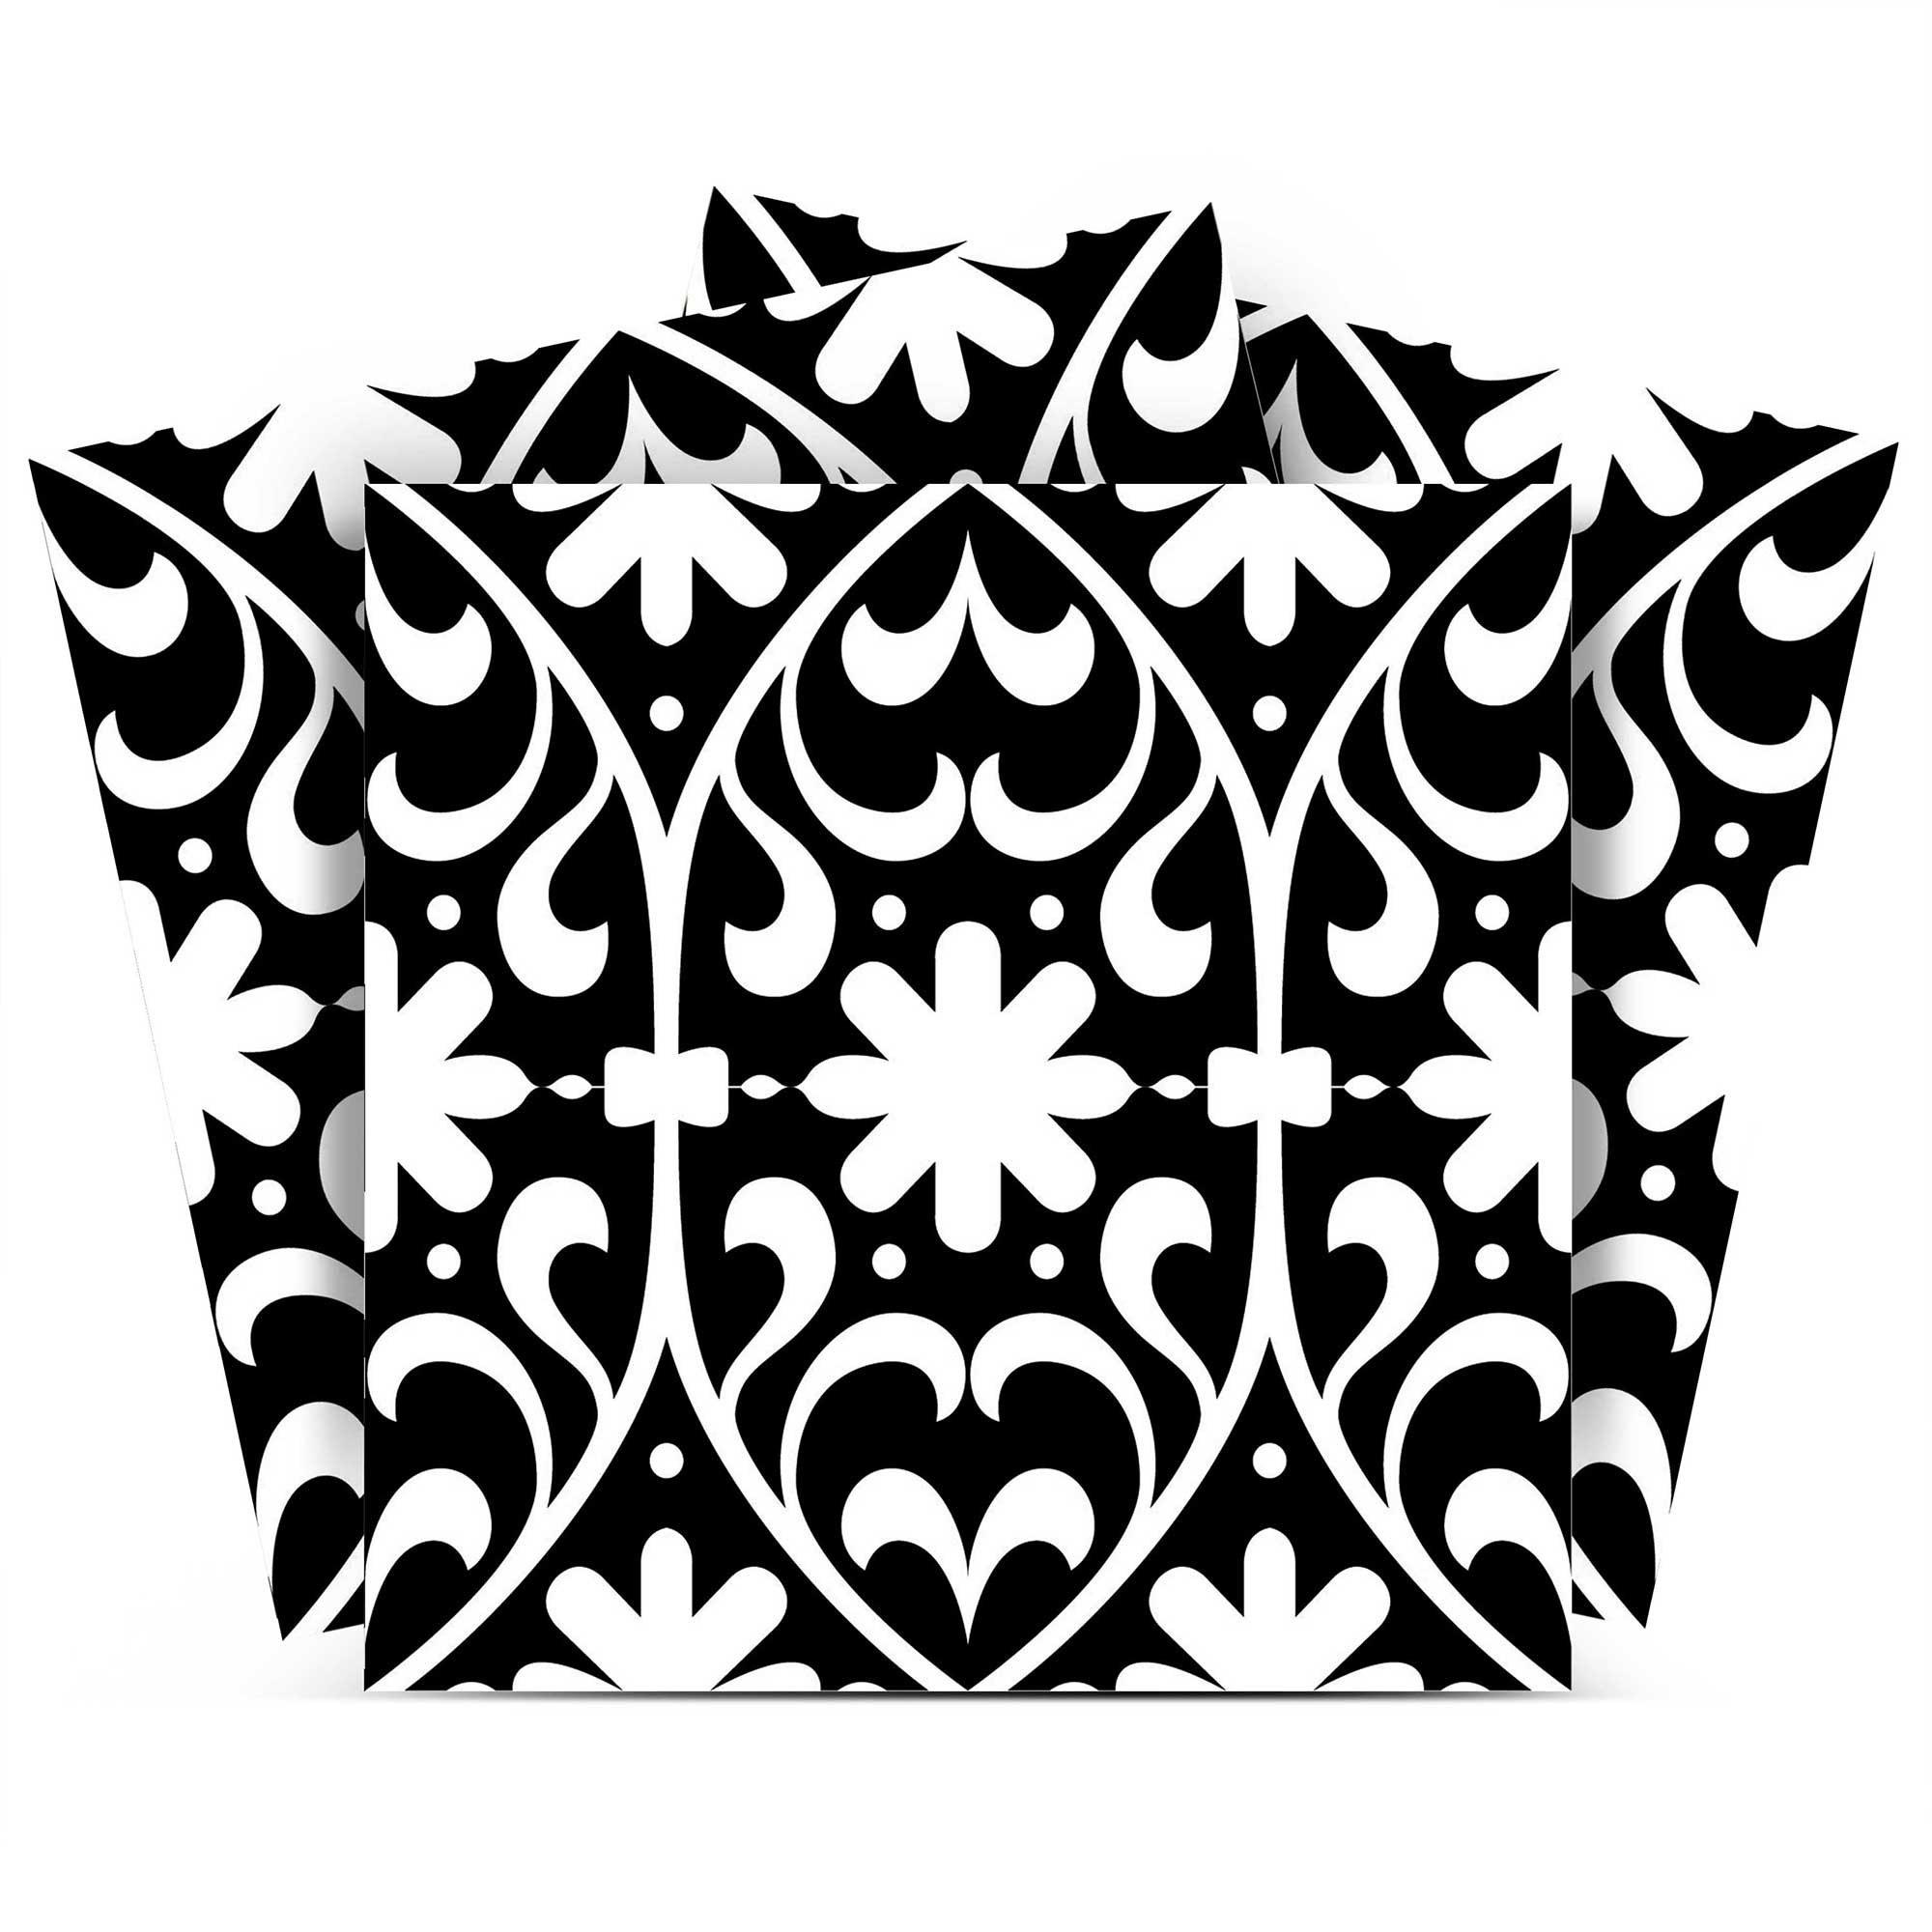 8" X 8" Black and White Floral Peel and Stick Removable Tiles-399879-1